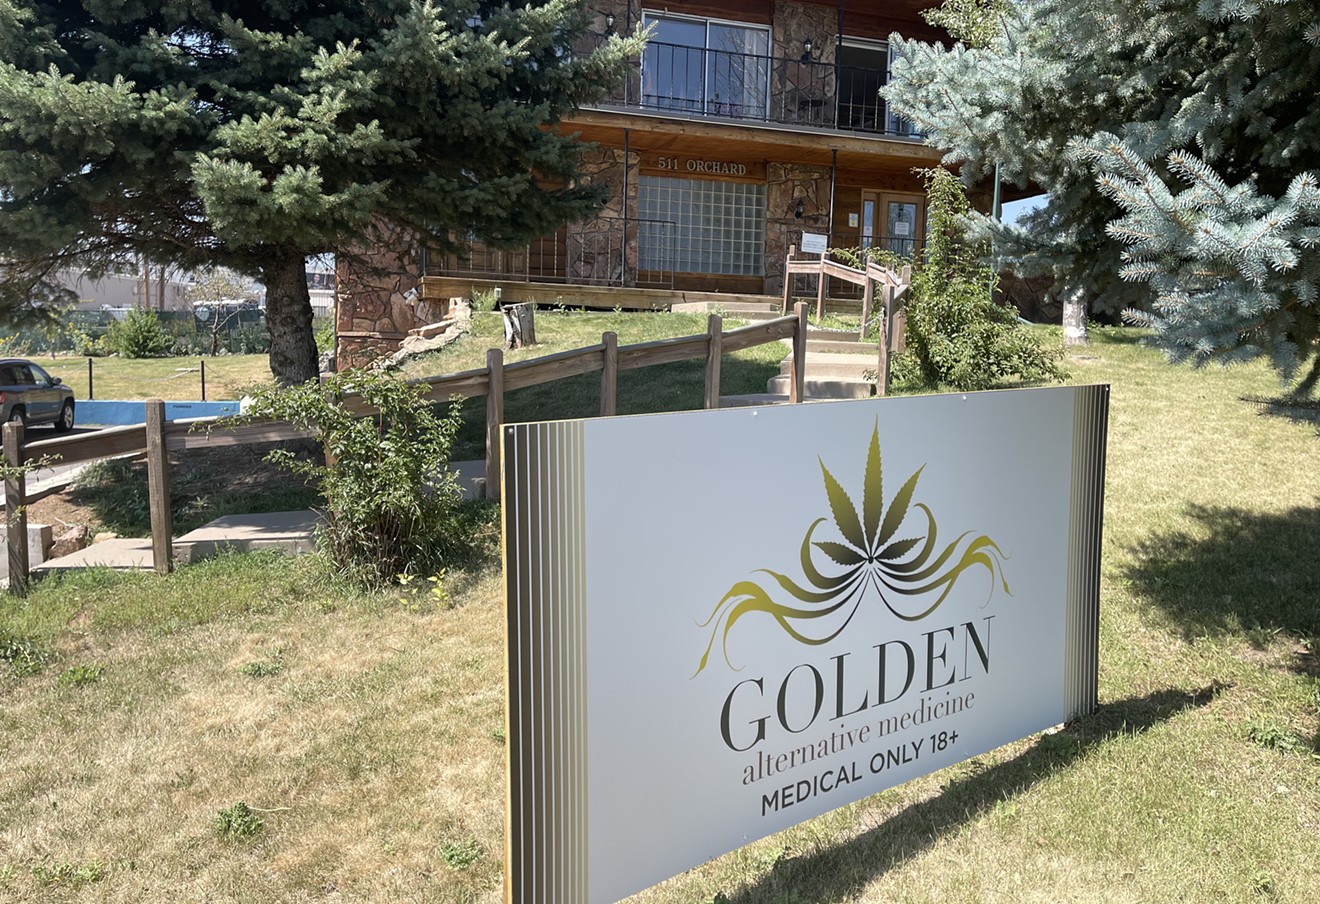 Golden's lone medical marijuana dispensary may have a chance to offer recreational sales after the 2021 election results are finalized.